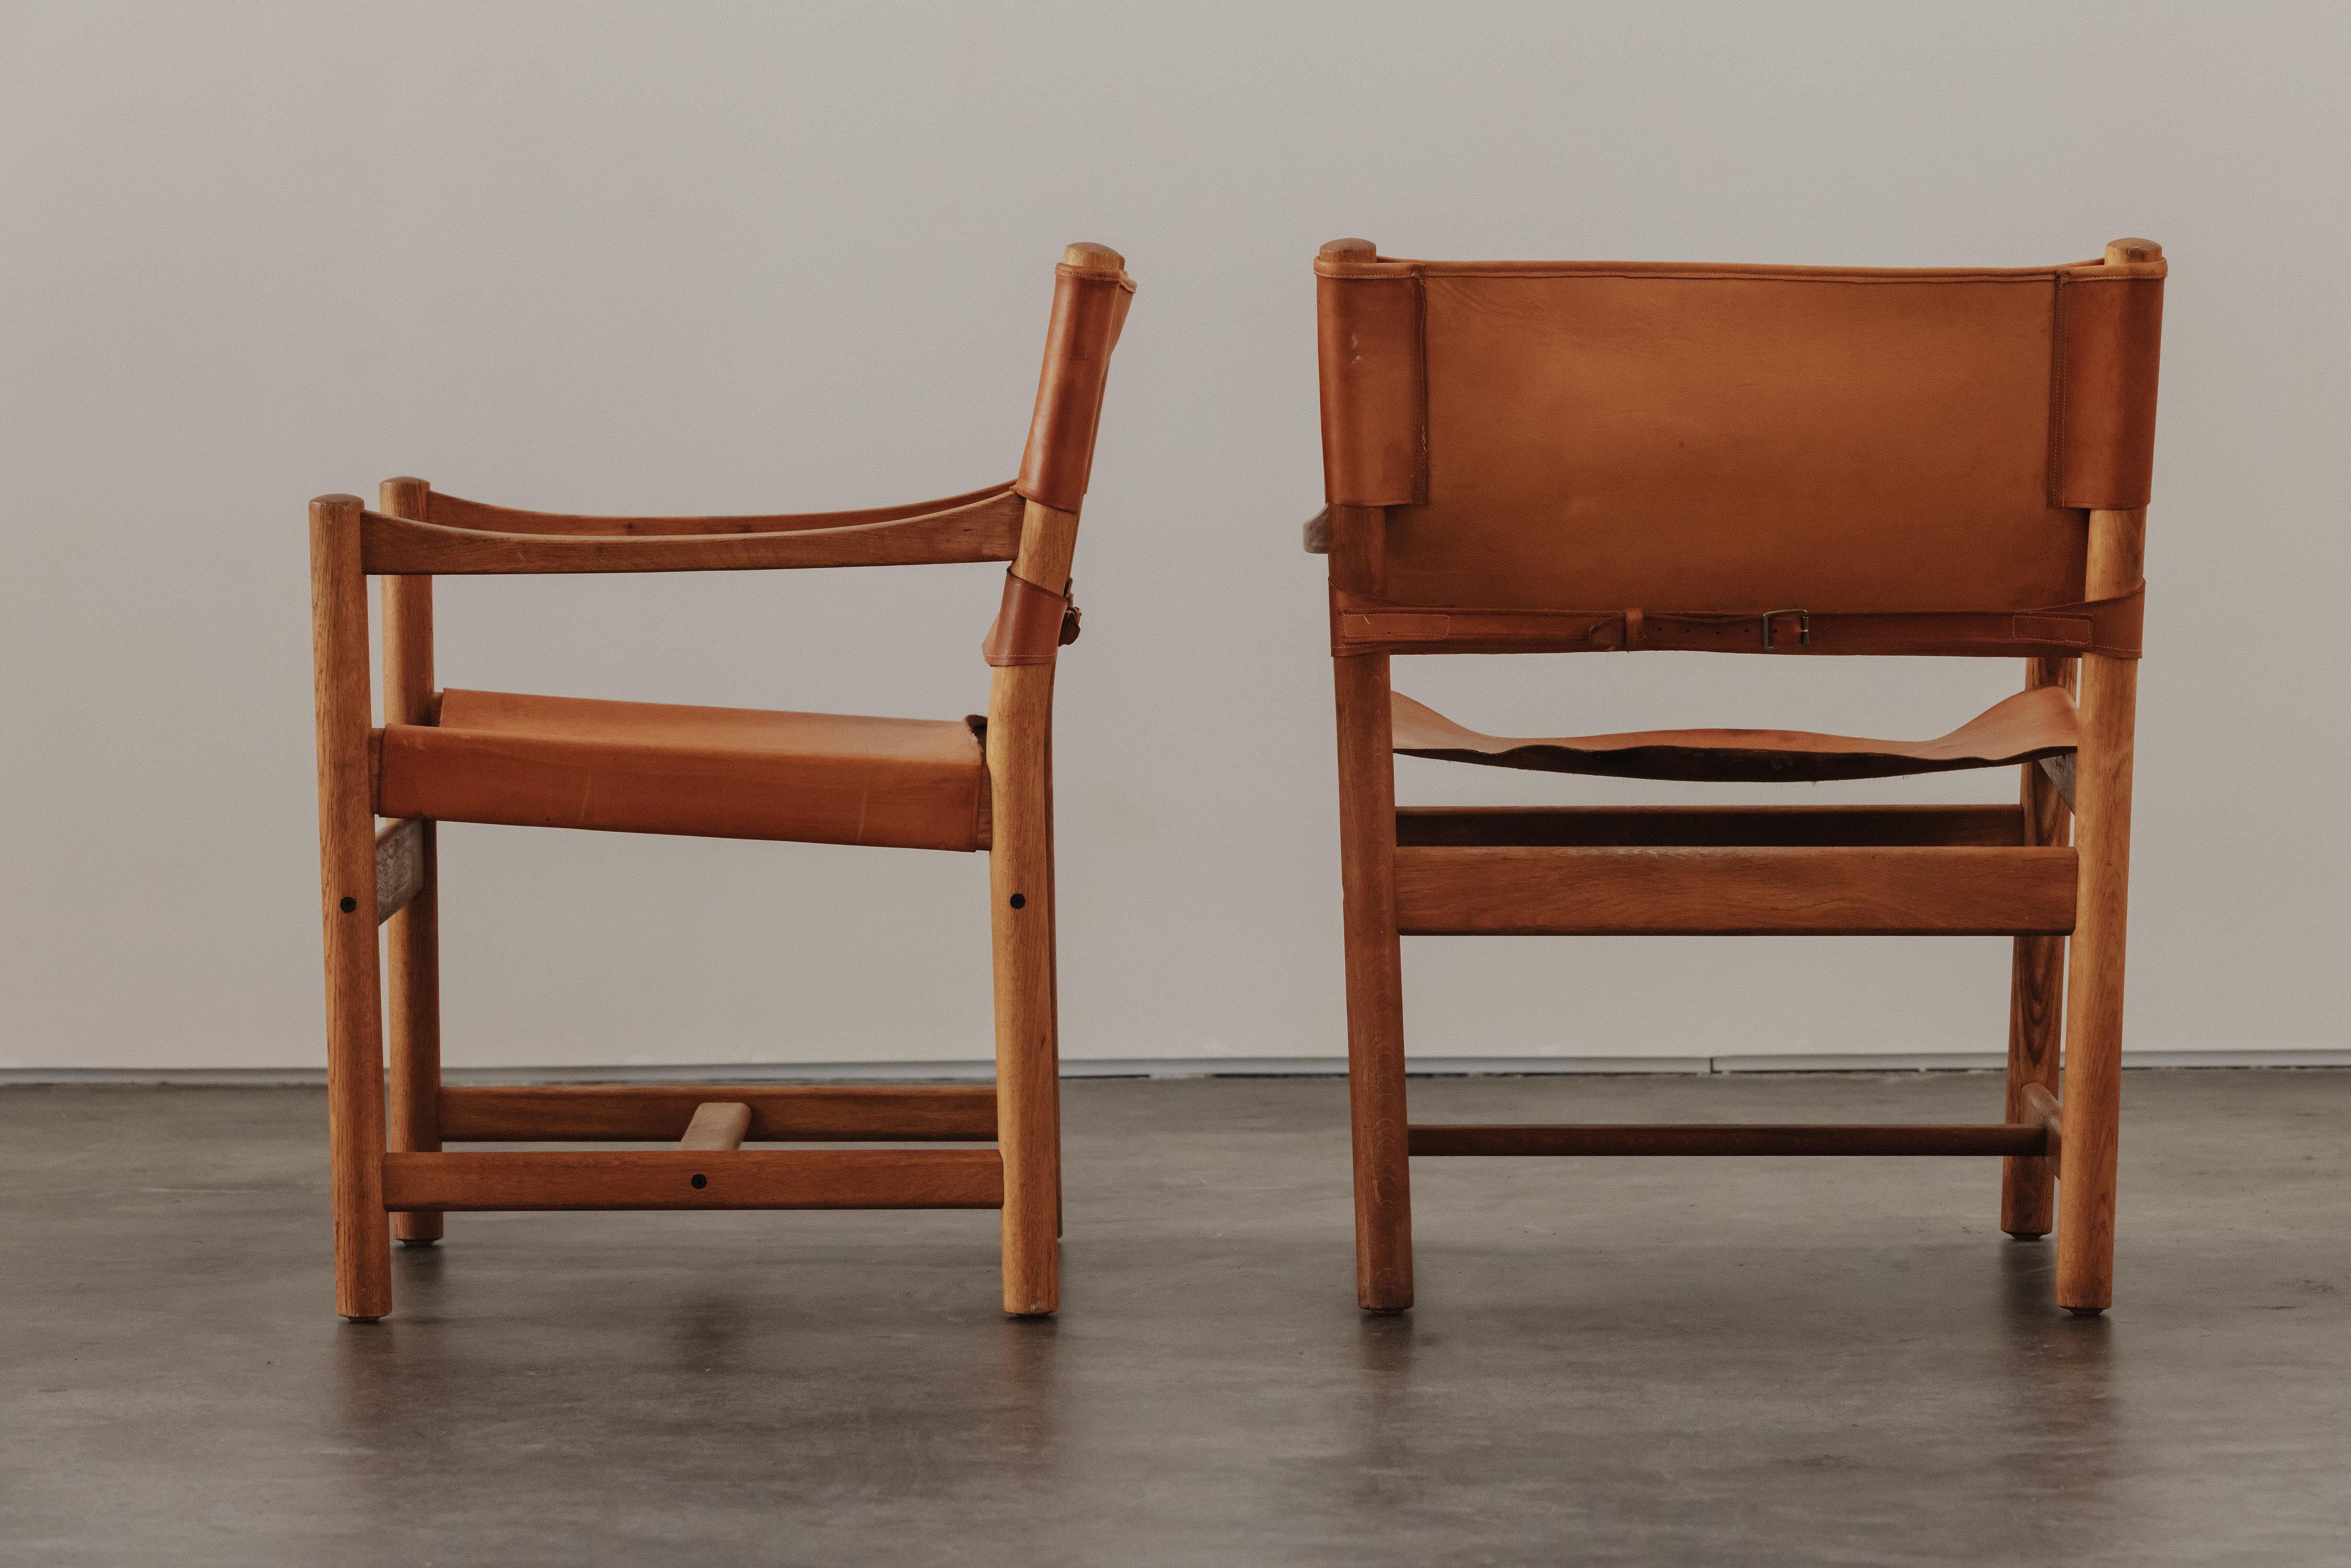 Late 20th Century Vintage Pair Of Cognac Leather Lounge Chairs From Denmark, Circa 1970 For Sale